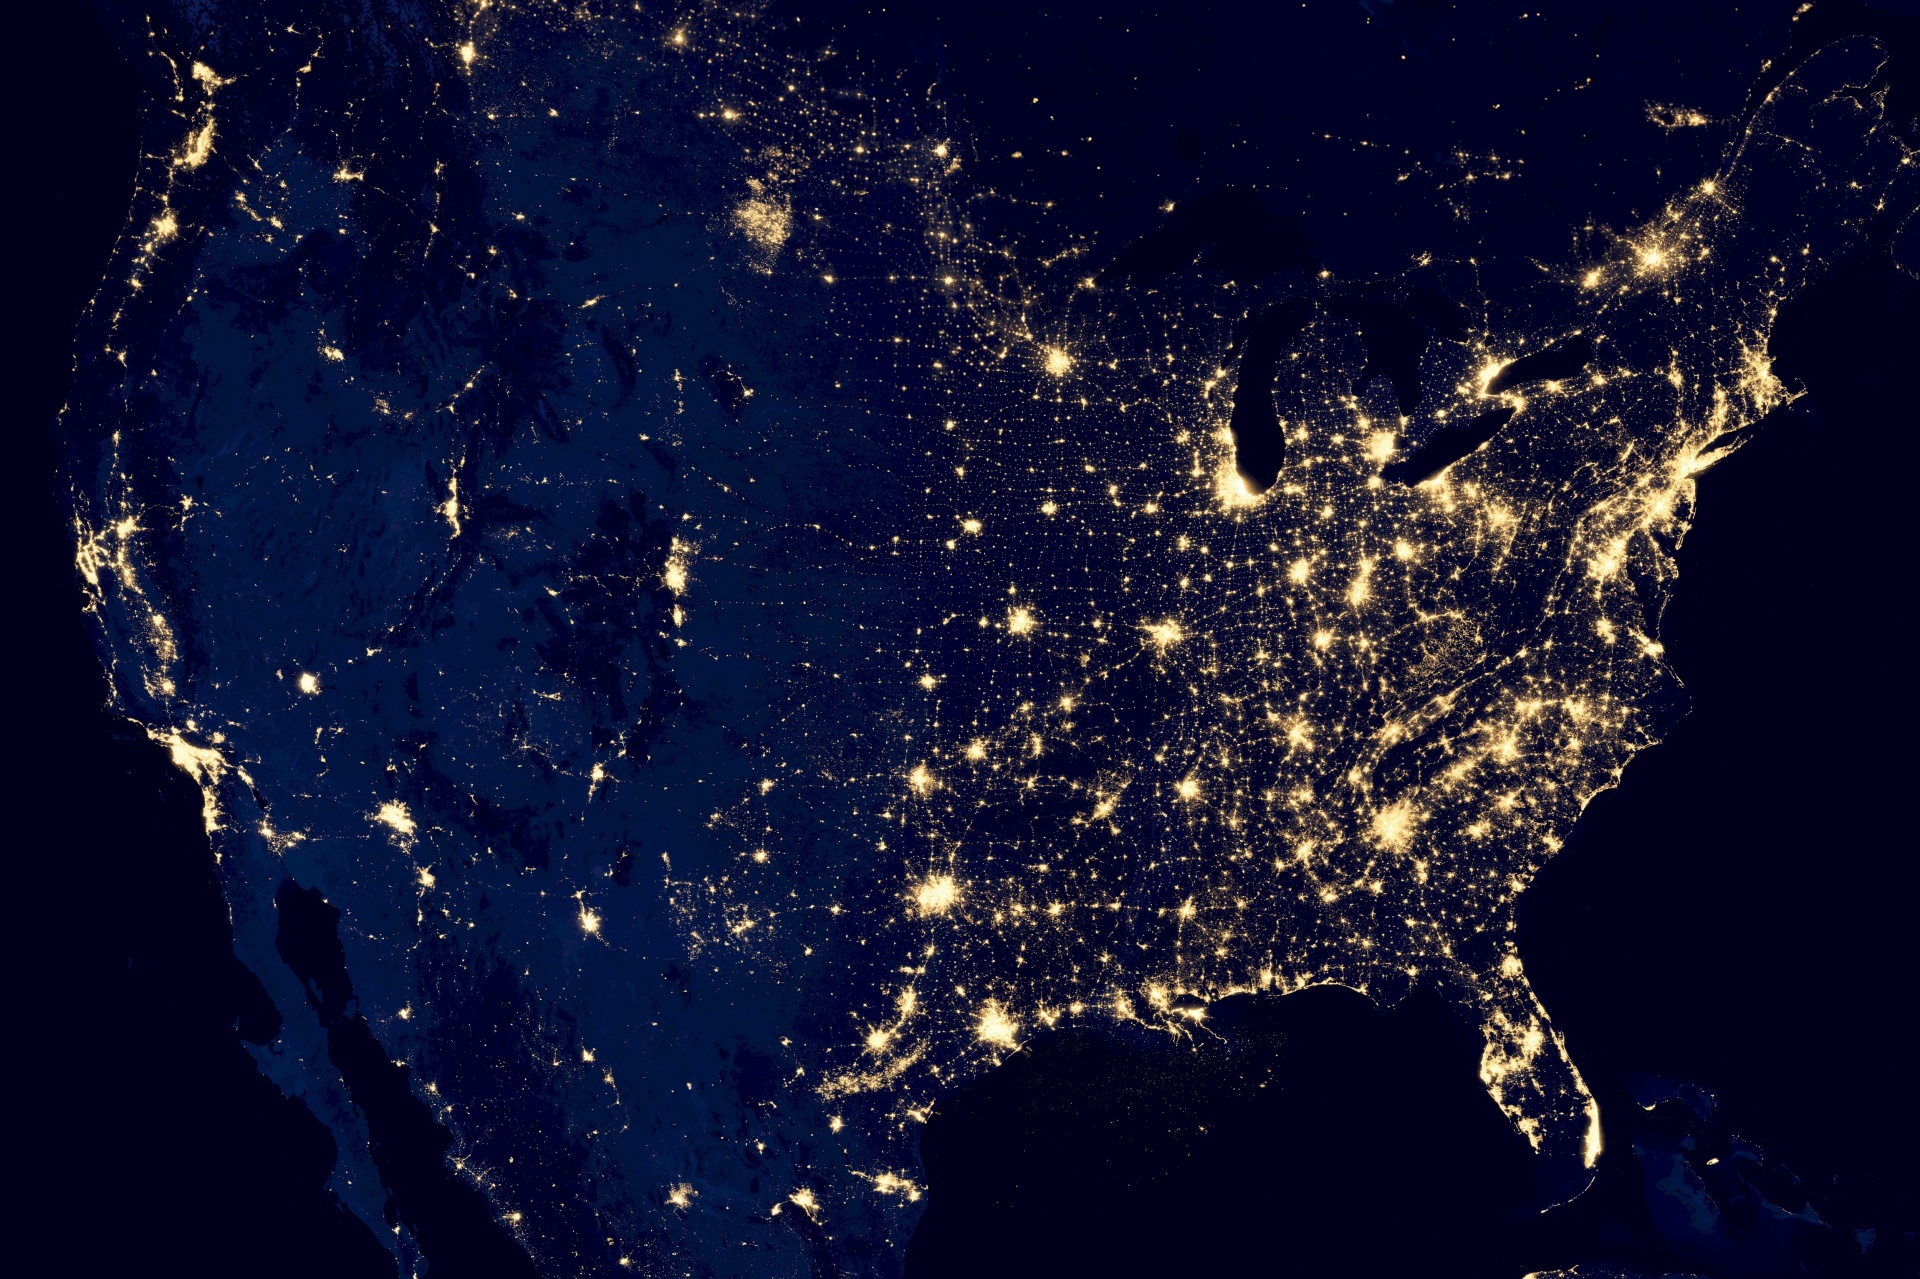 Lights of various cities in the United States as seen from outer space